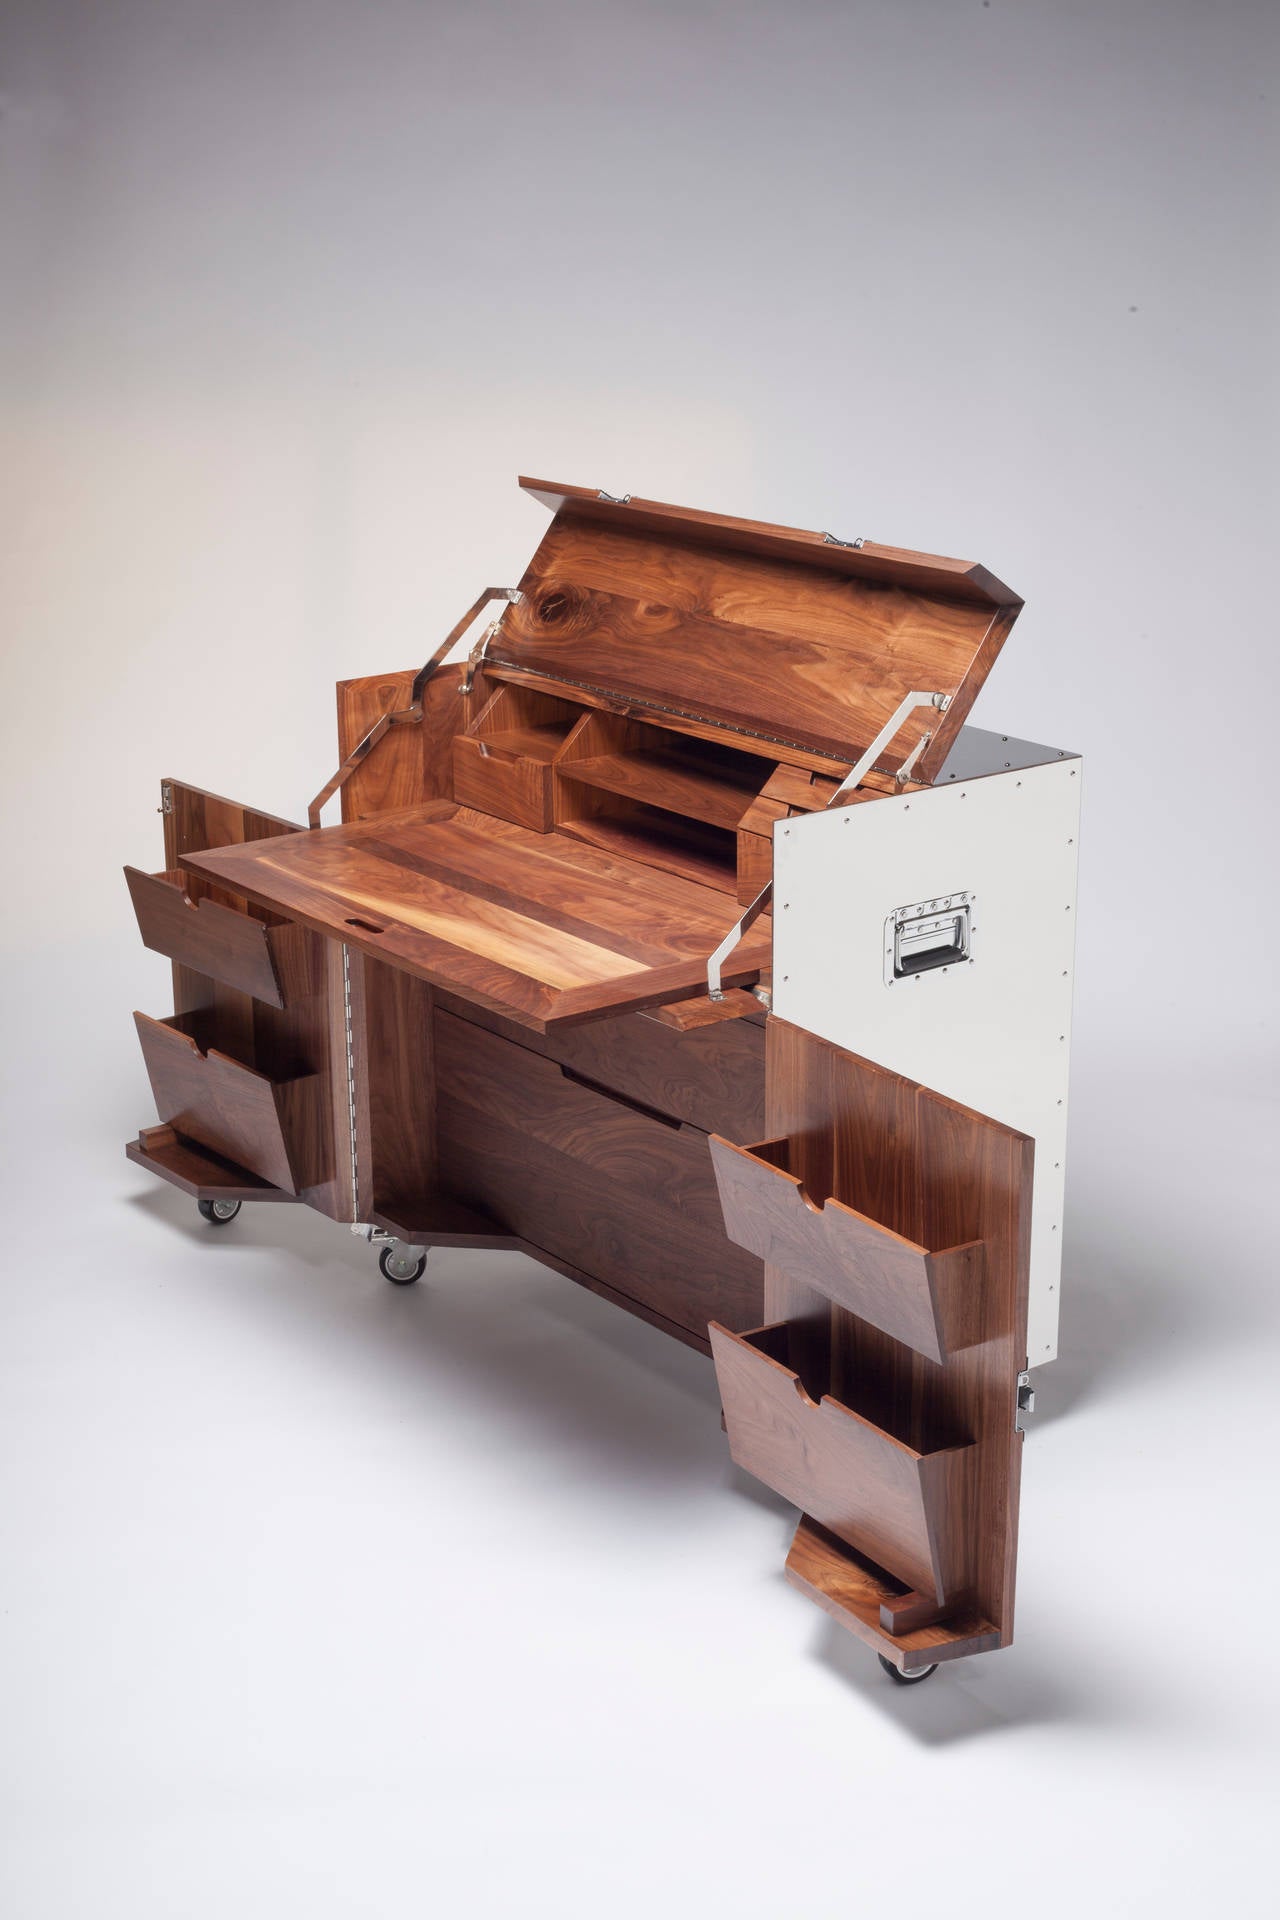 The Writing Desk is from Naihan Li's celebrated CRATES Series. 

Naihan’s idea for the CRATES originated from the uncertainty of Beijing’s shifting urban playground, where once discovered, industrial and artist spaces were quickly destroyed.